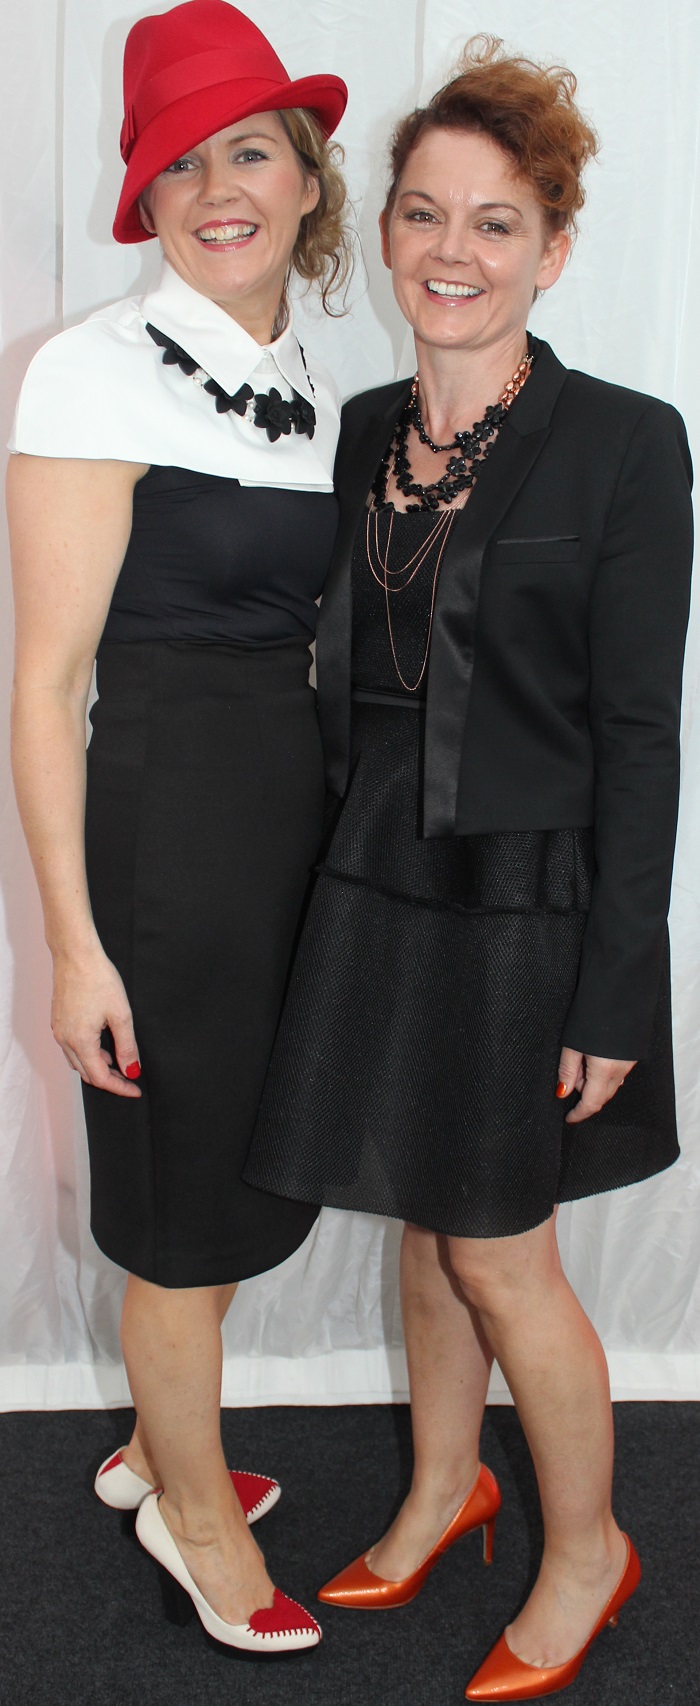 At the Rose Fashion show were, from left: Teresa O'Brian and Mary O'Sullivan. Photo by Gavin O’Connor.